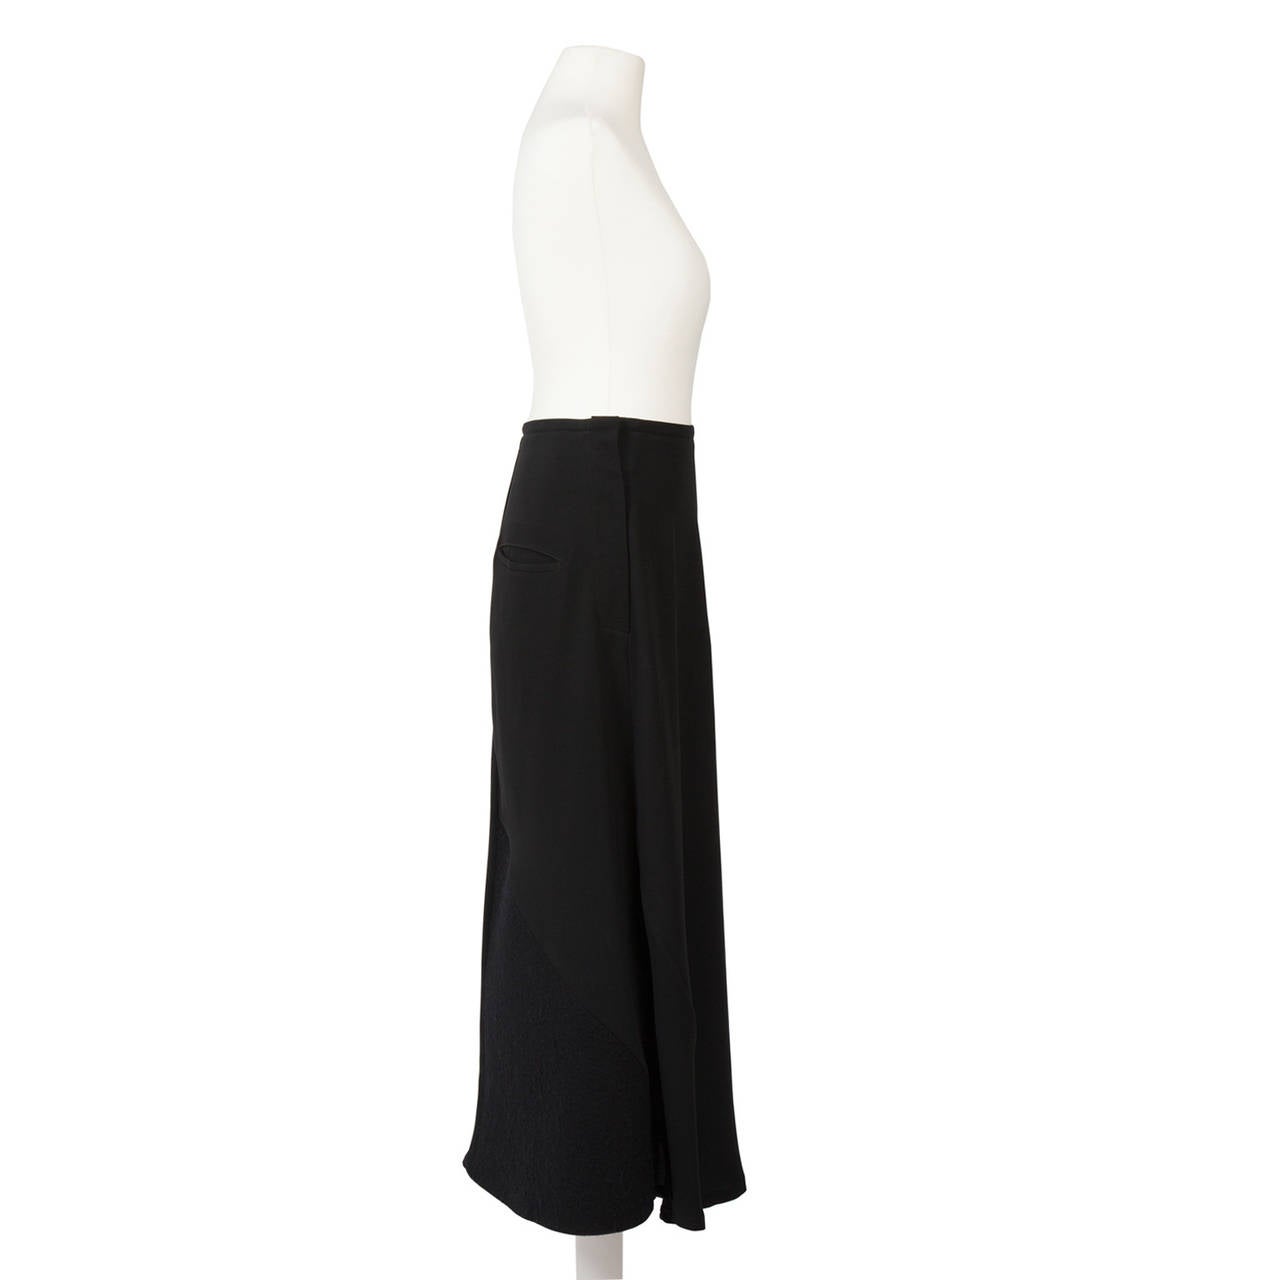 Iconic Yohji Yamamoto skirt,  cuts and form - combining weight of two materials - Polyester 100% / Lane wool 100% 

Measurements :
Skirt : Length - 88 cm Waist - 38 cm